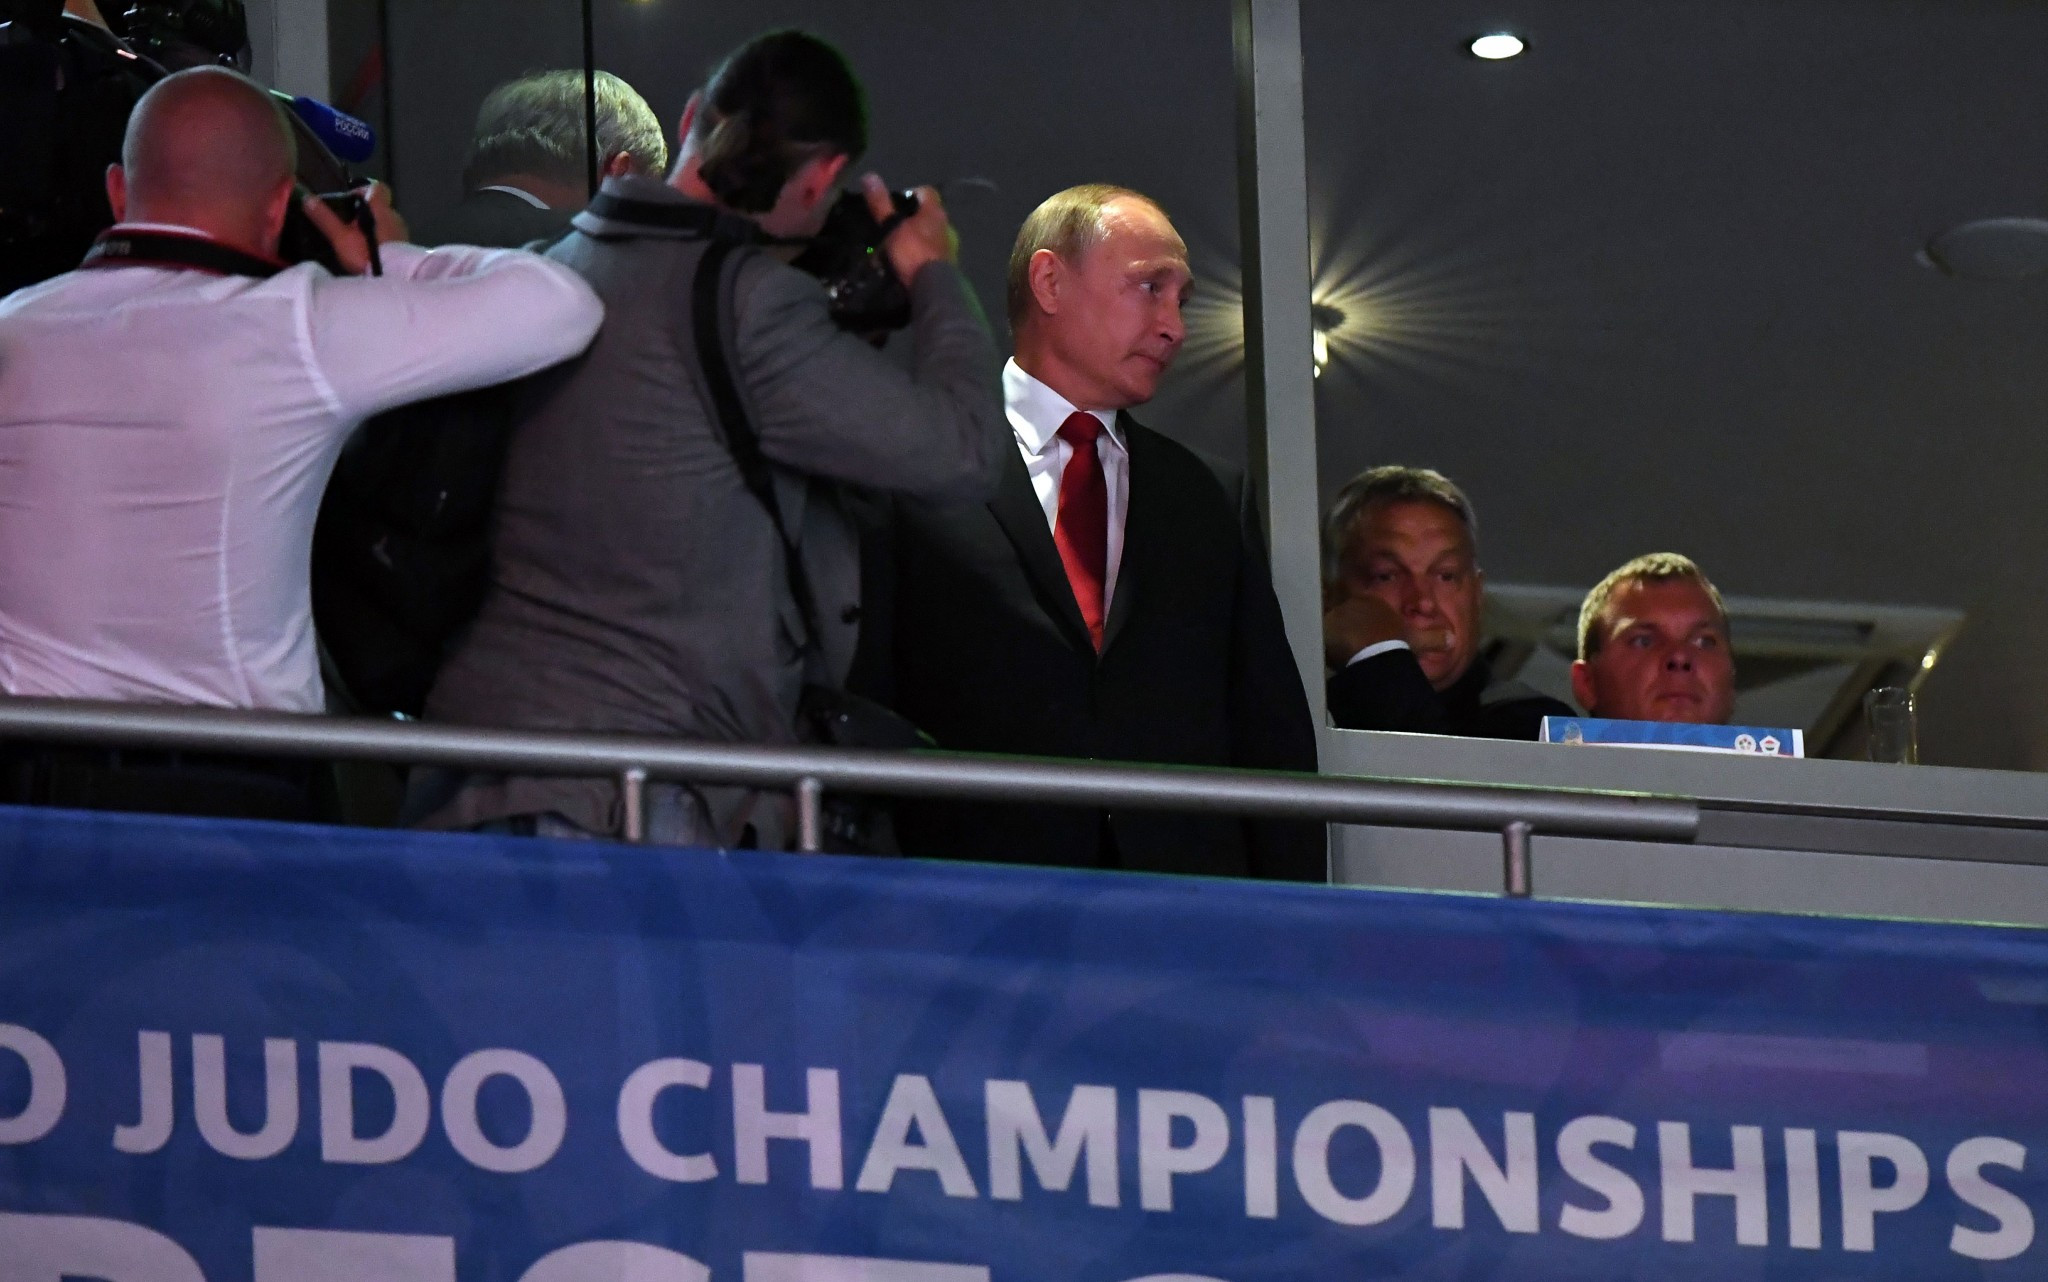 Putin in attendance as Japan win first two gold medals at IJF World Championships